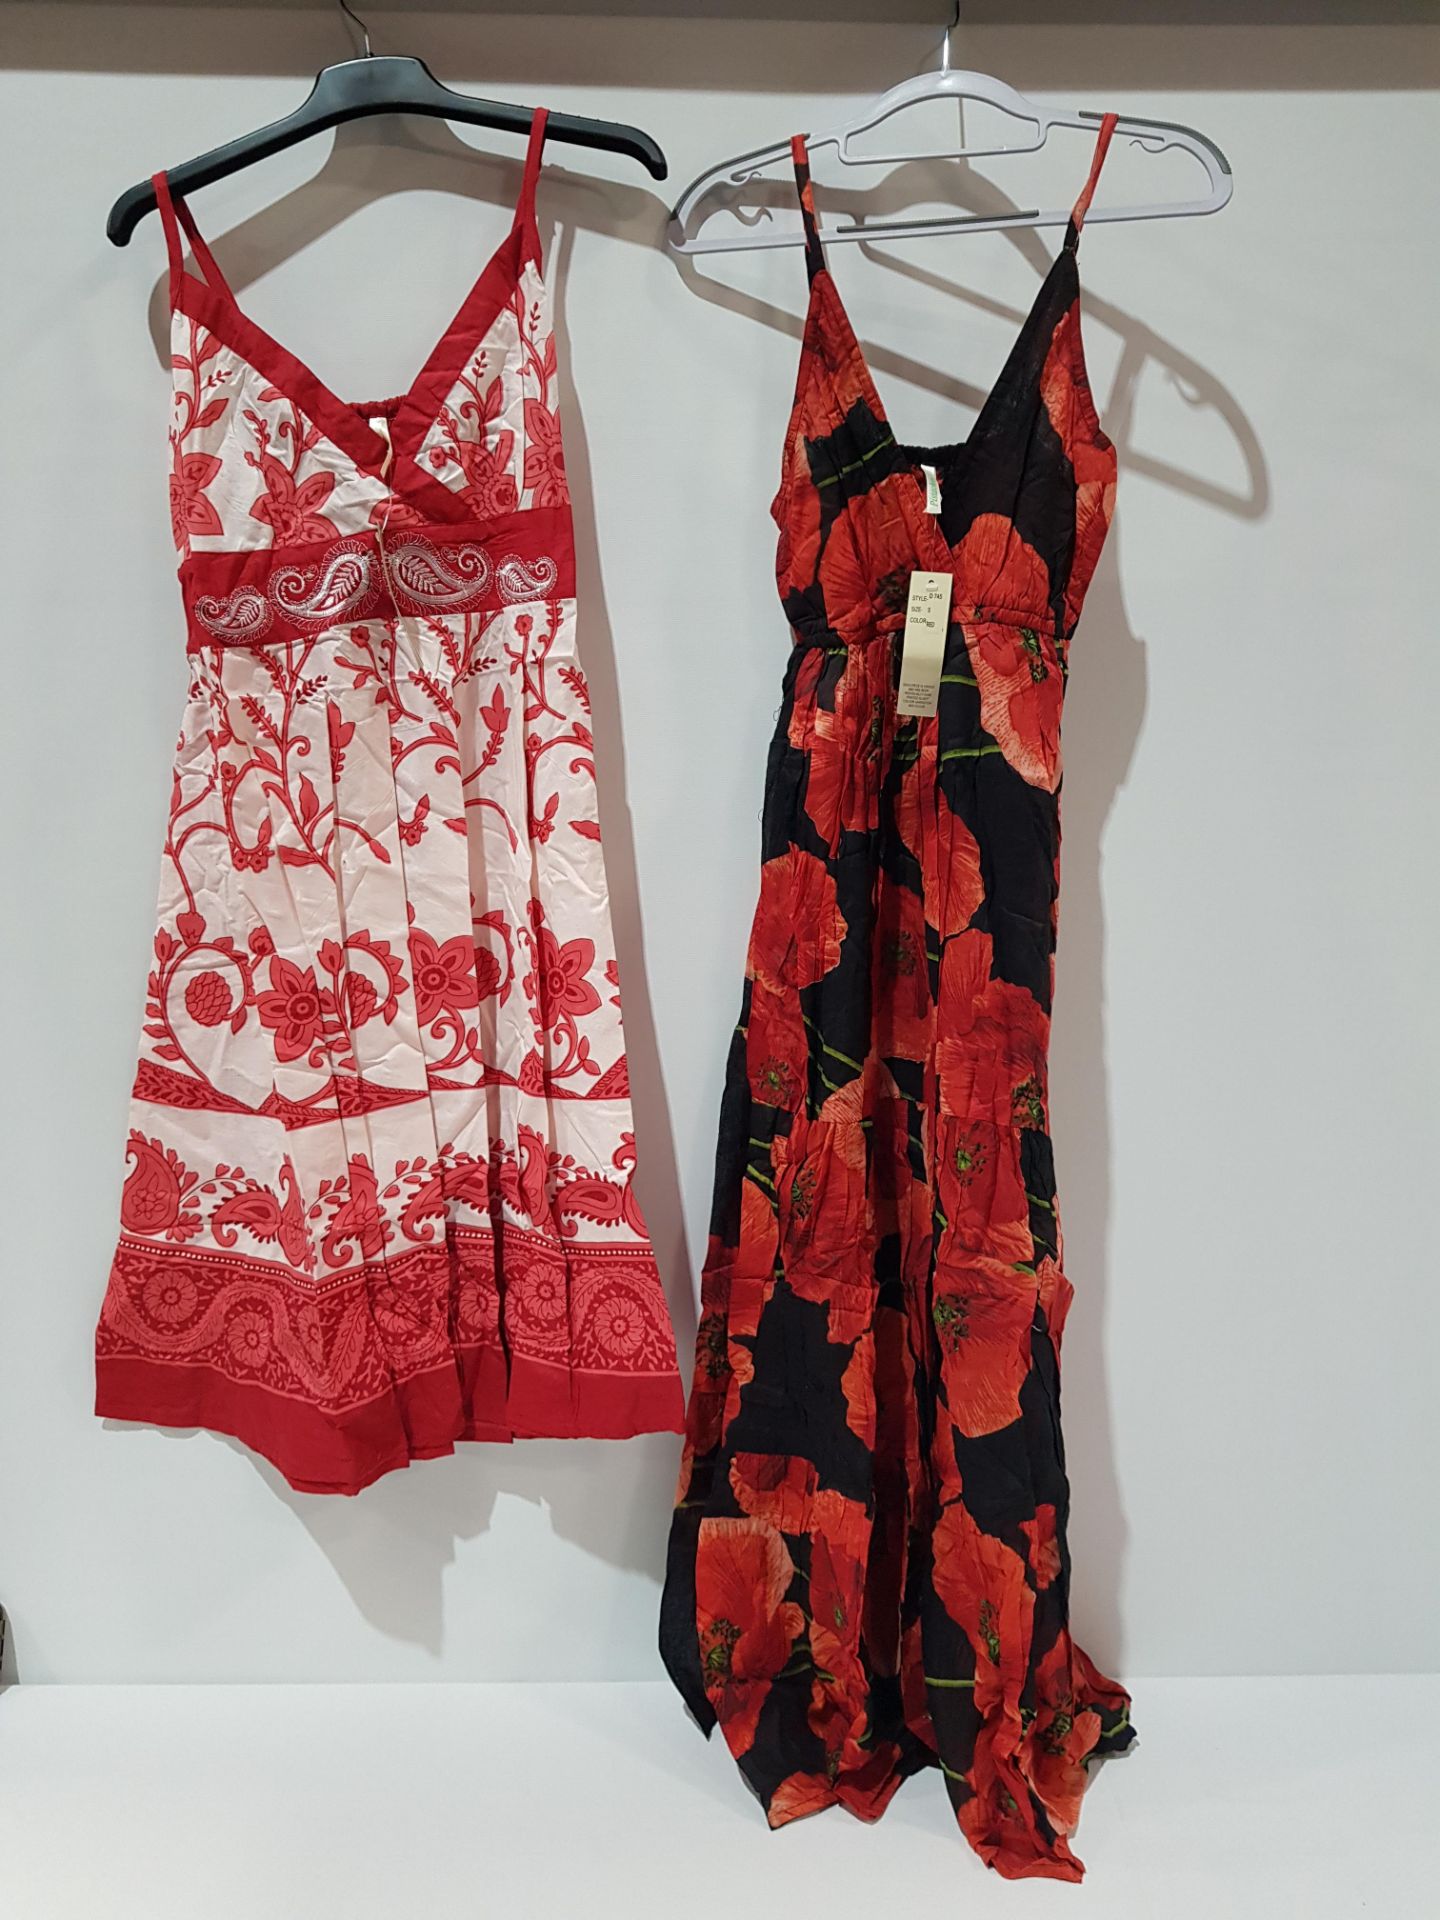 24 X BRAND NEW PISTACHIO DRESSES IN TWO FLORAL DESIGN'S IN RED SIZE SMALL ( £25 EACH TOTAL £600 ) IN